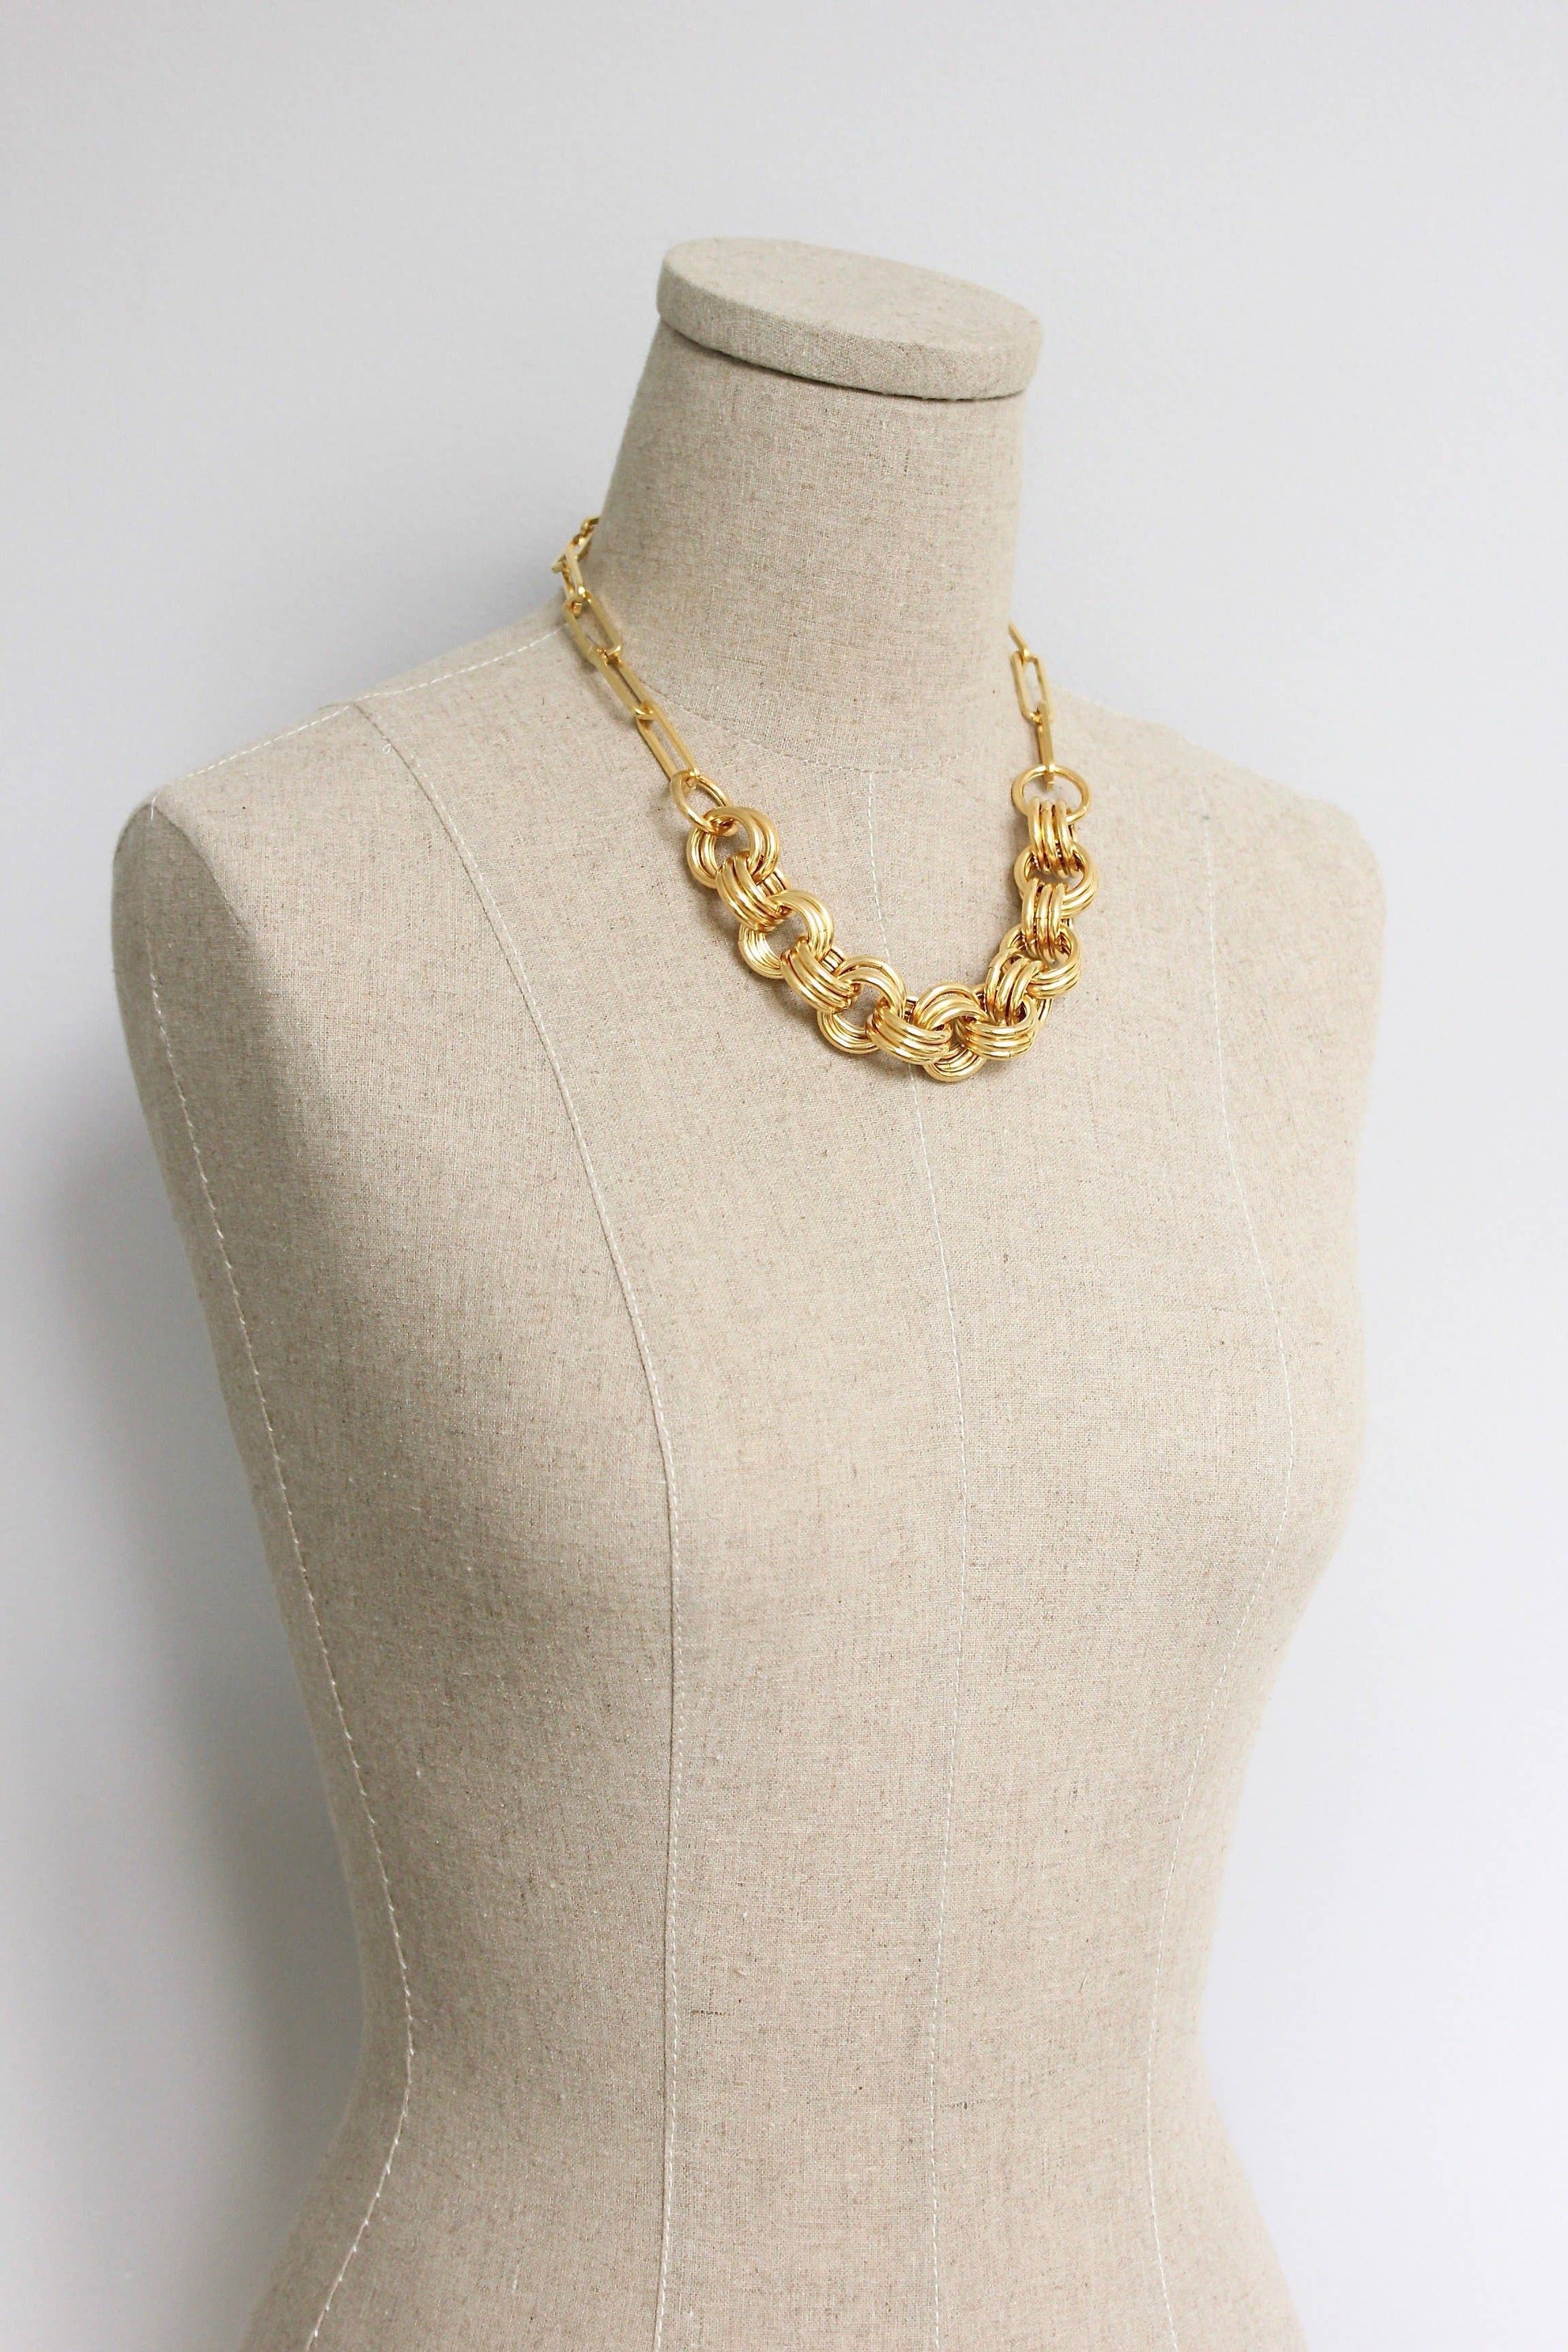 18” 18k gold plated brass chain necklace with 3 inch extender on a neck stand